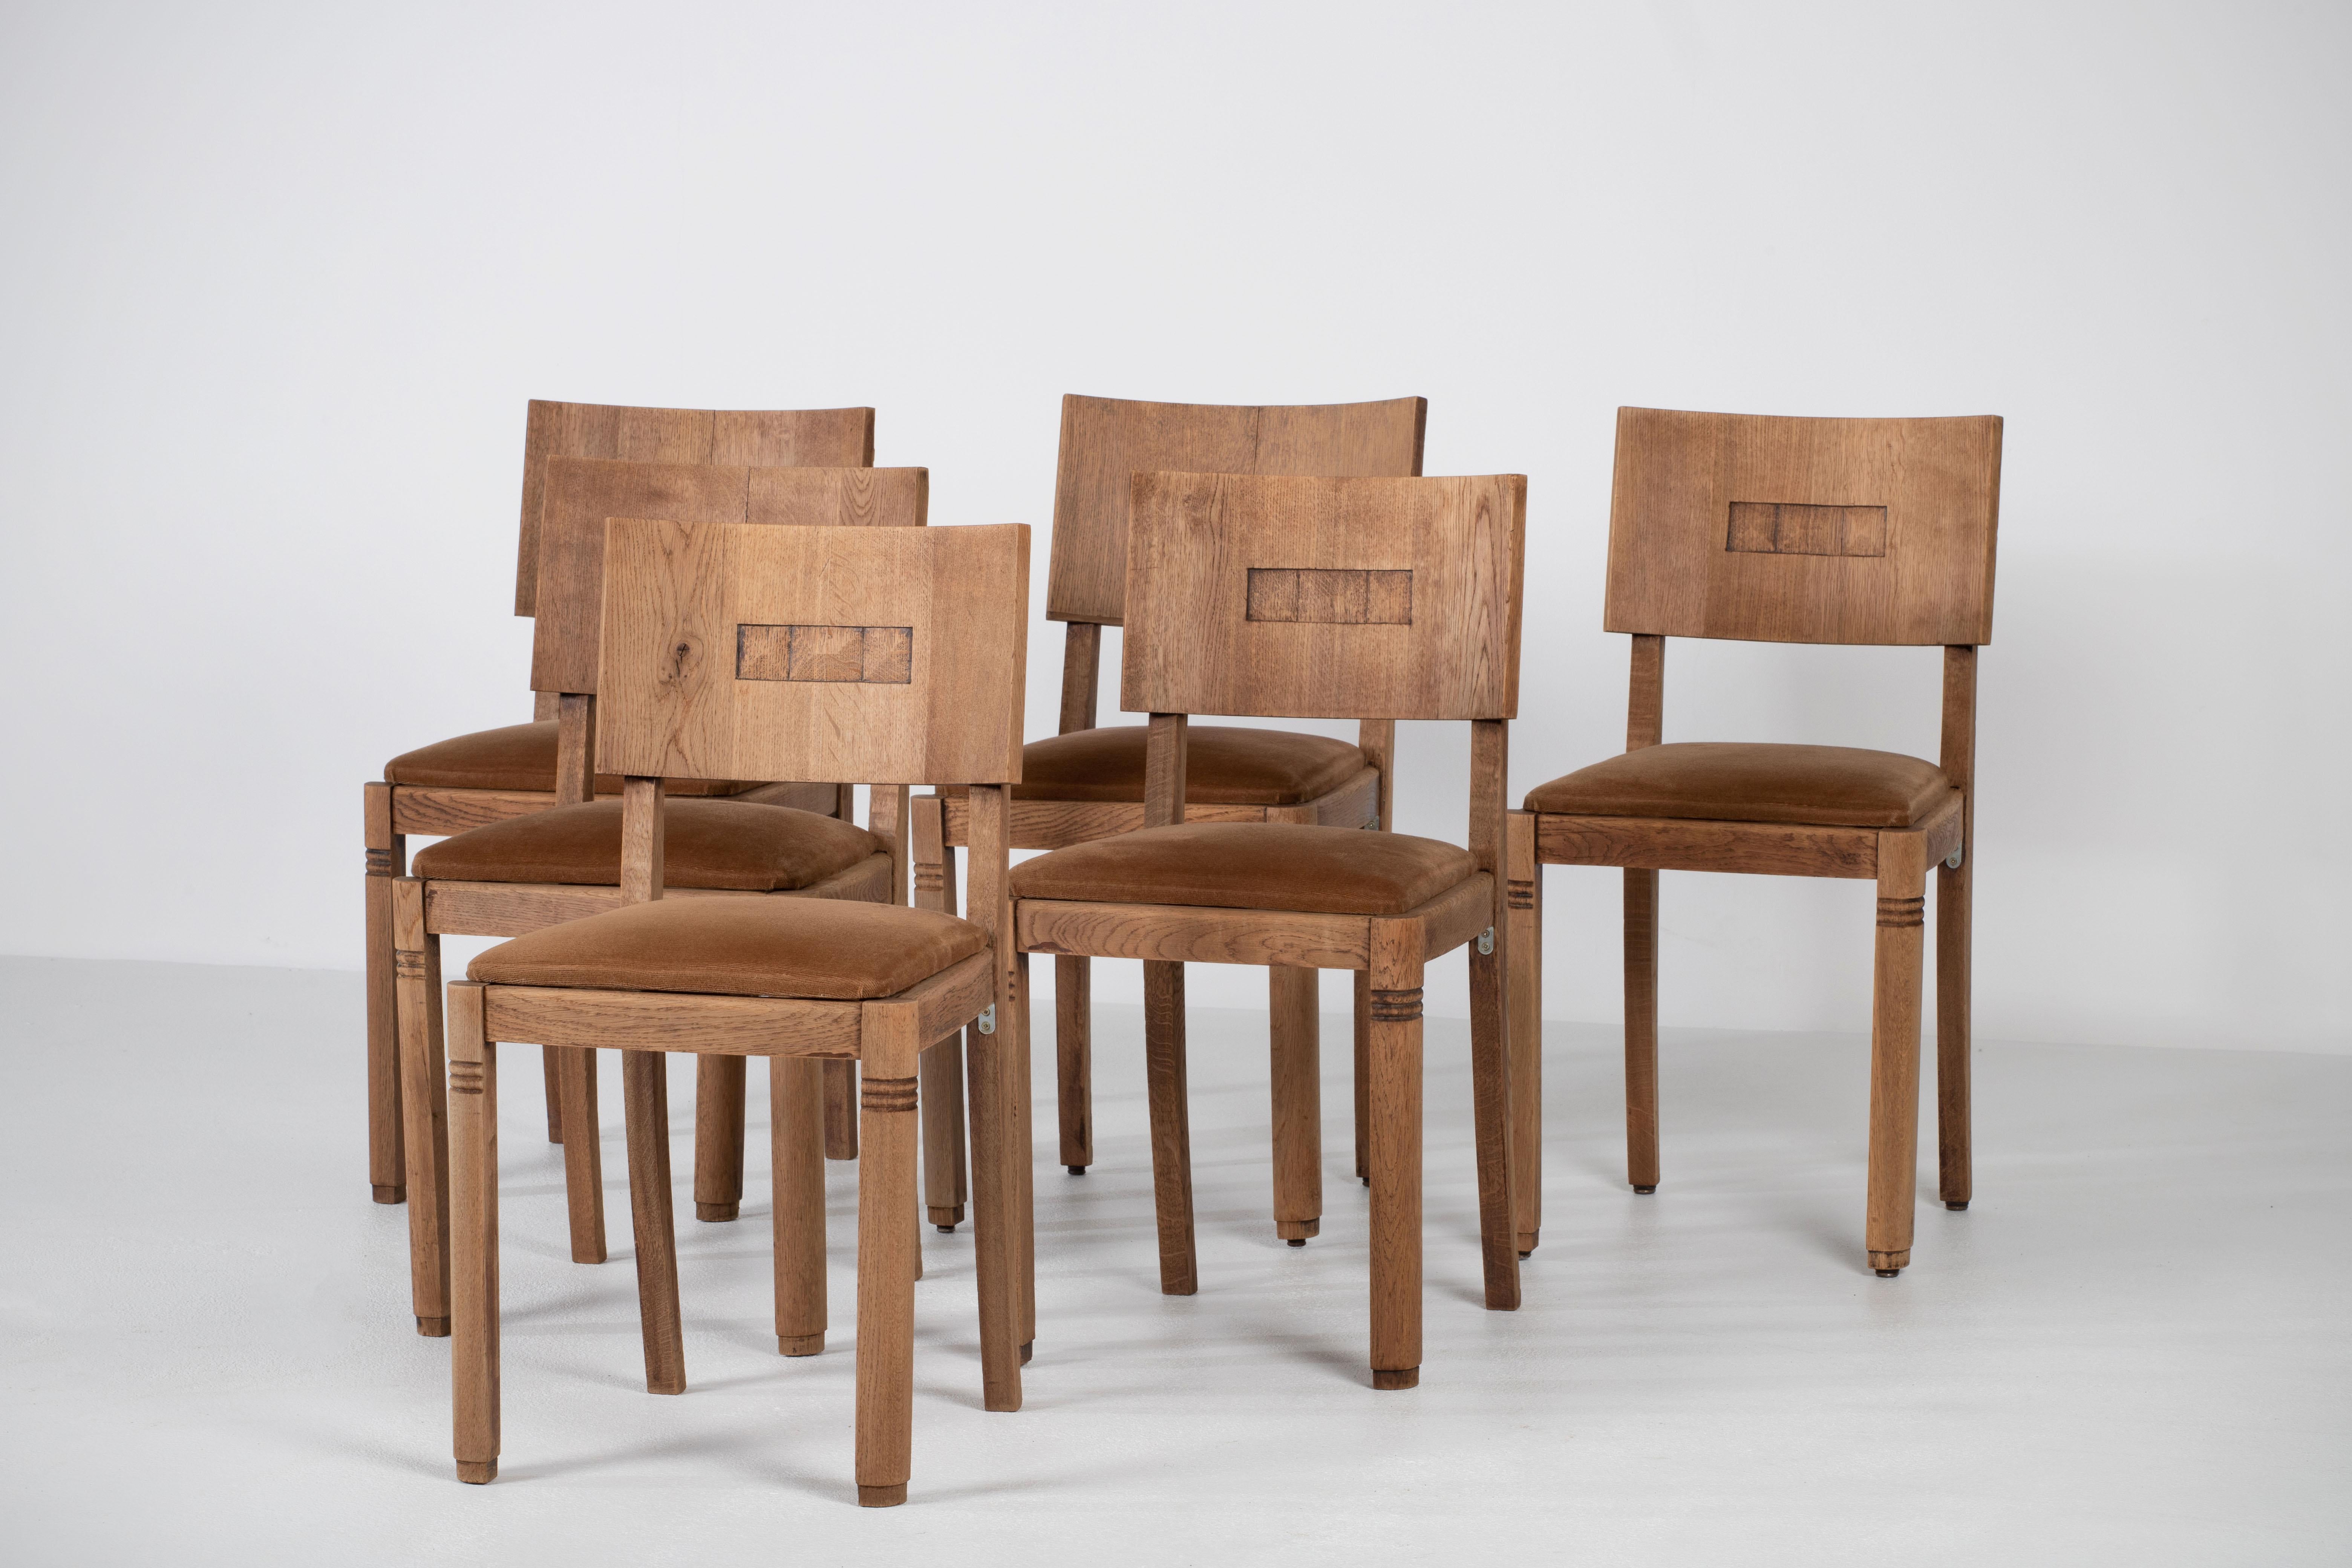 French Art Deco Set of 6 Chairs, Dudouyt Insp, France, 1940 For Sale